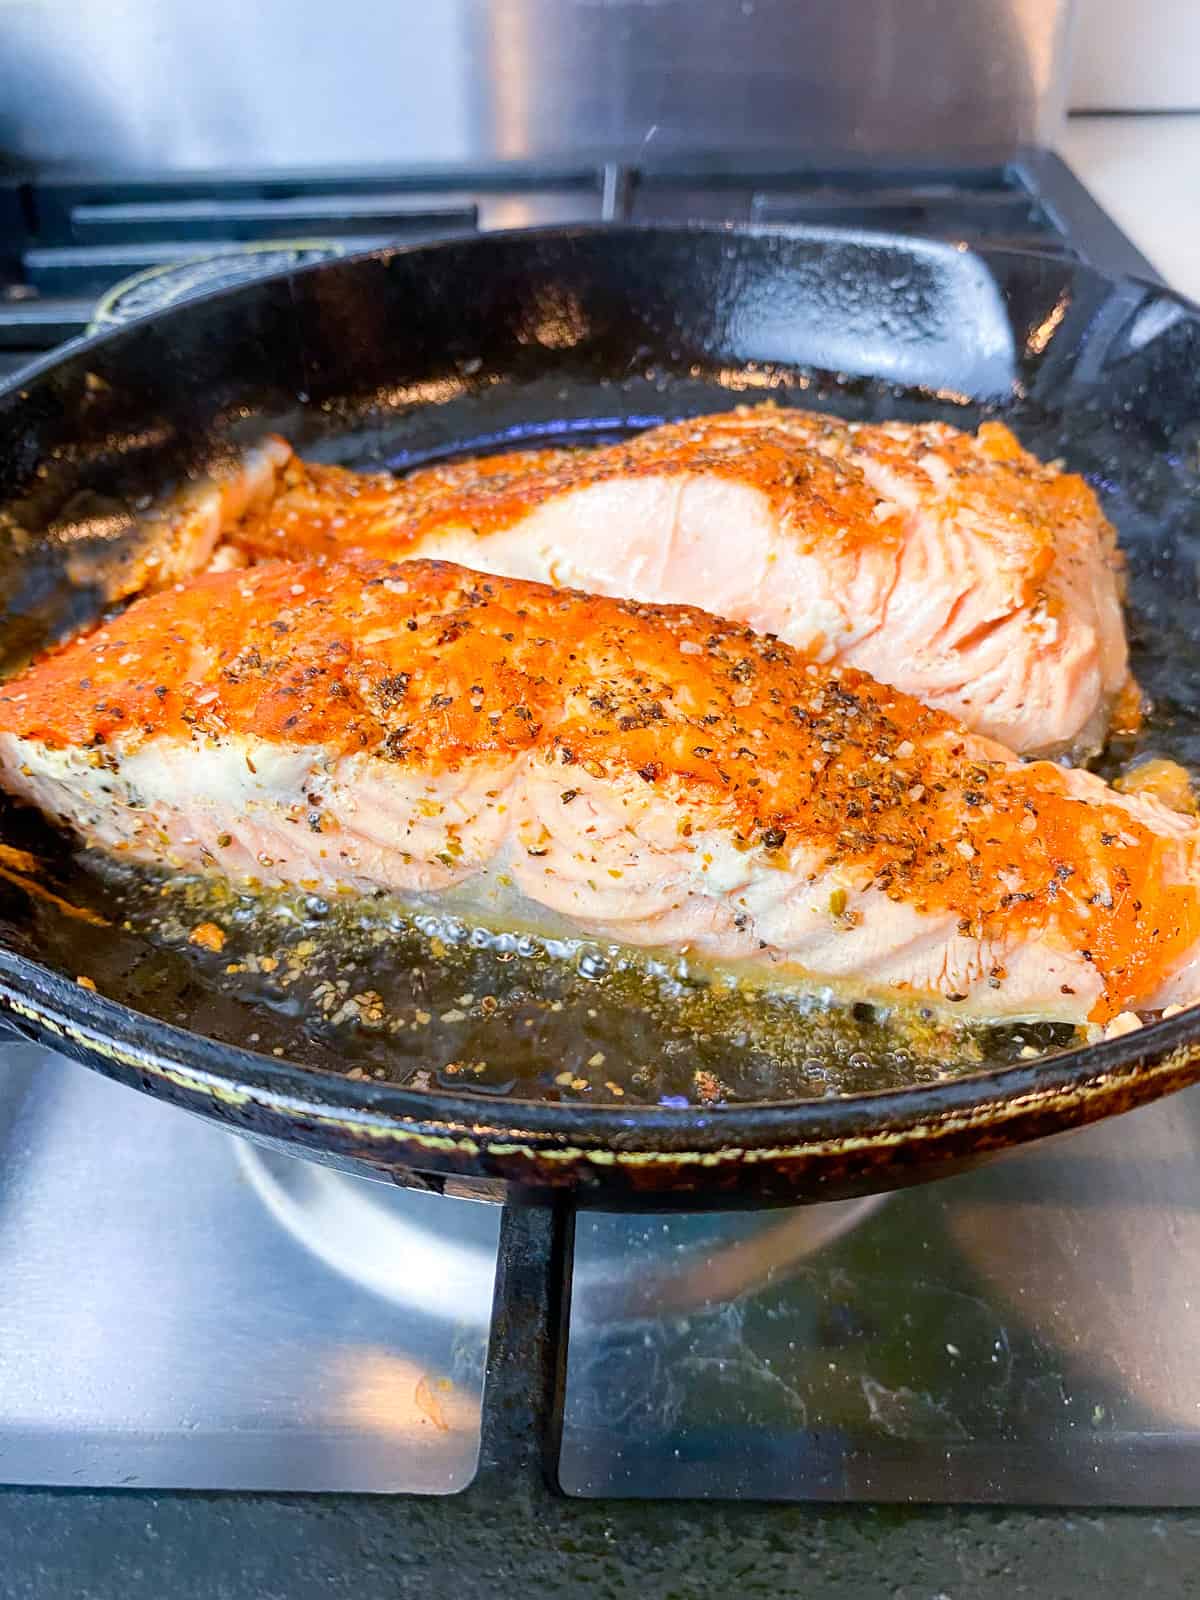 Sear the salmon filets in a hot skillet.